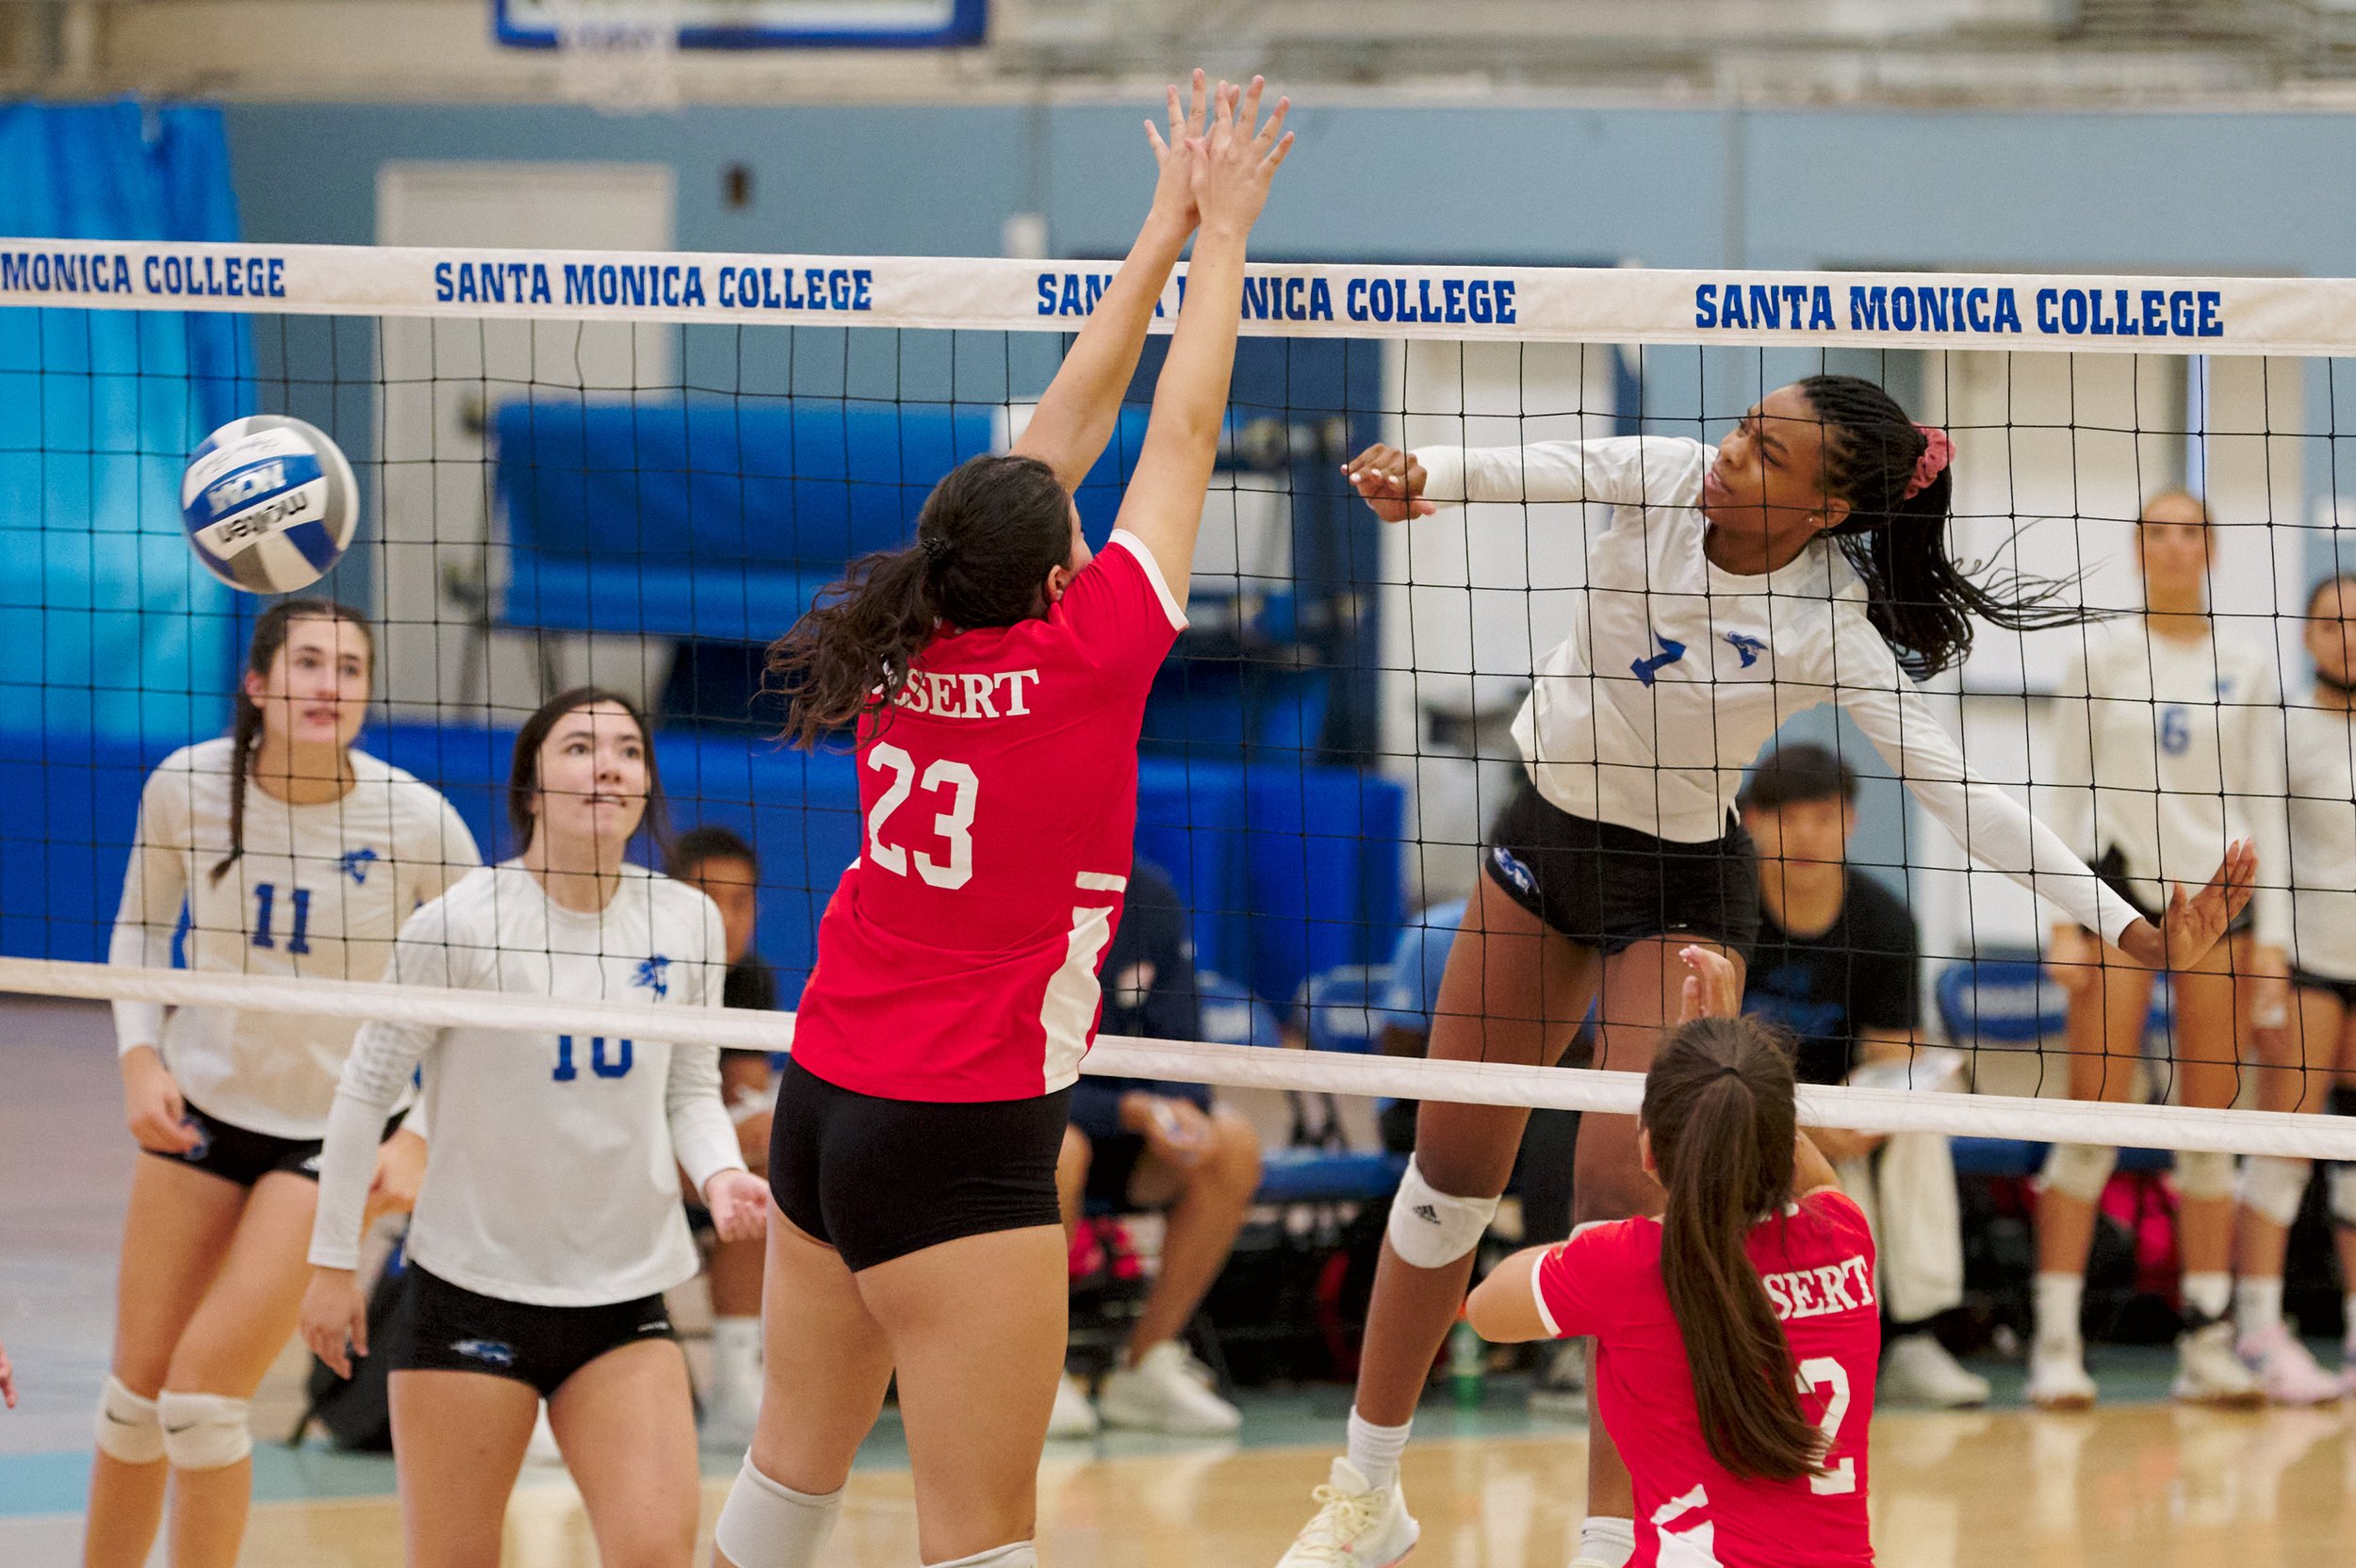  Santa Monica College Corsairs' Zarha Stanton hits the ball past College of the Desert Roadrunners' Caitlin Bilhartz to score during the women's volleyball match on Friday, October 7, 2022, at the Corsair Gym in Santa Monica, Calif. The Corsairs won 